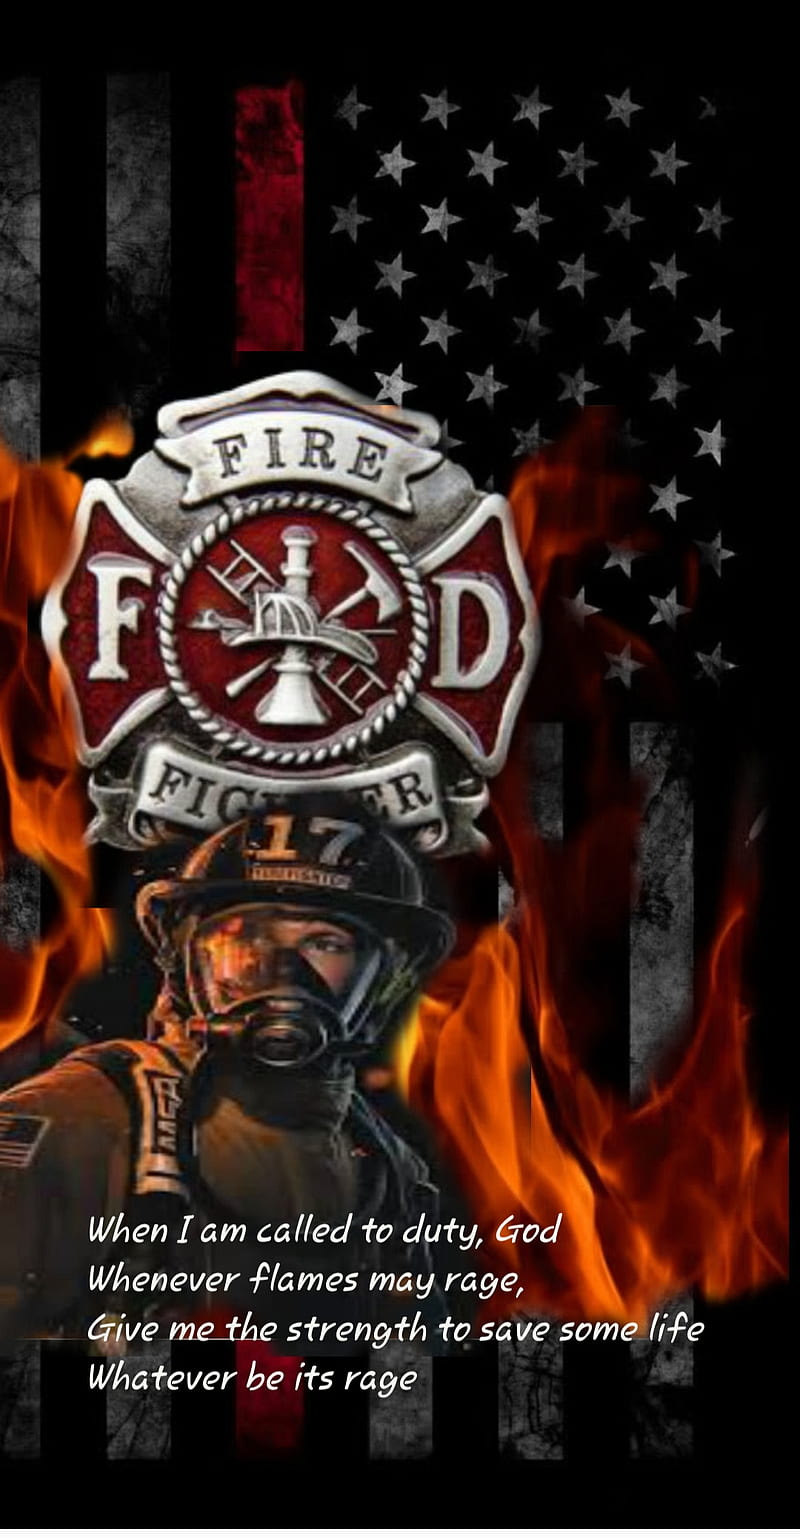 Firefighter Wallpaper For Phone 55 images